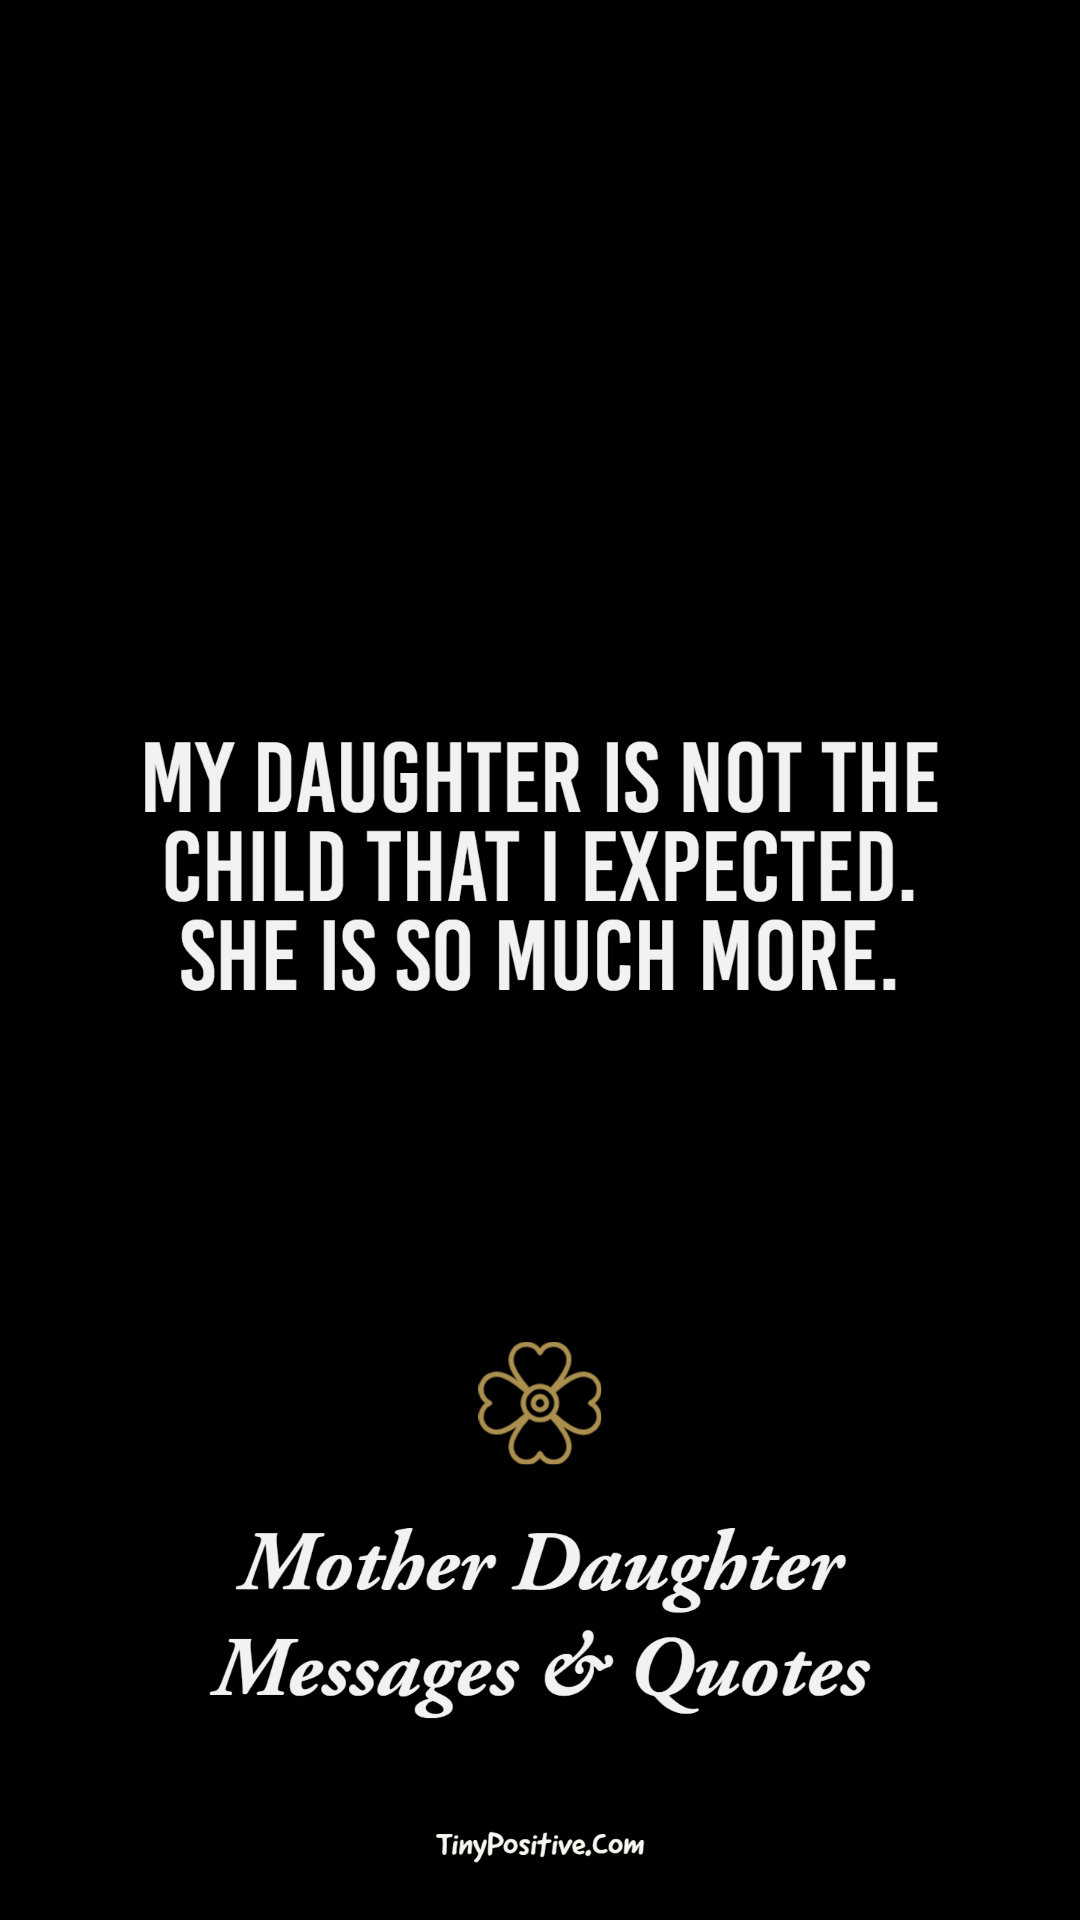 mother daughter quotes expressing unconditional love